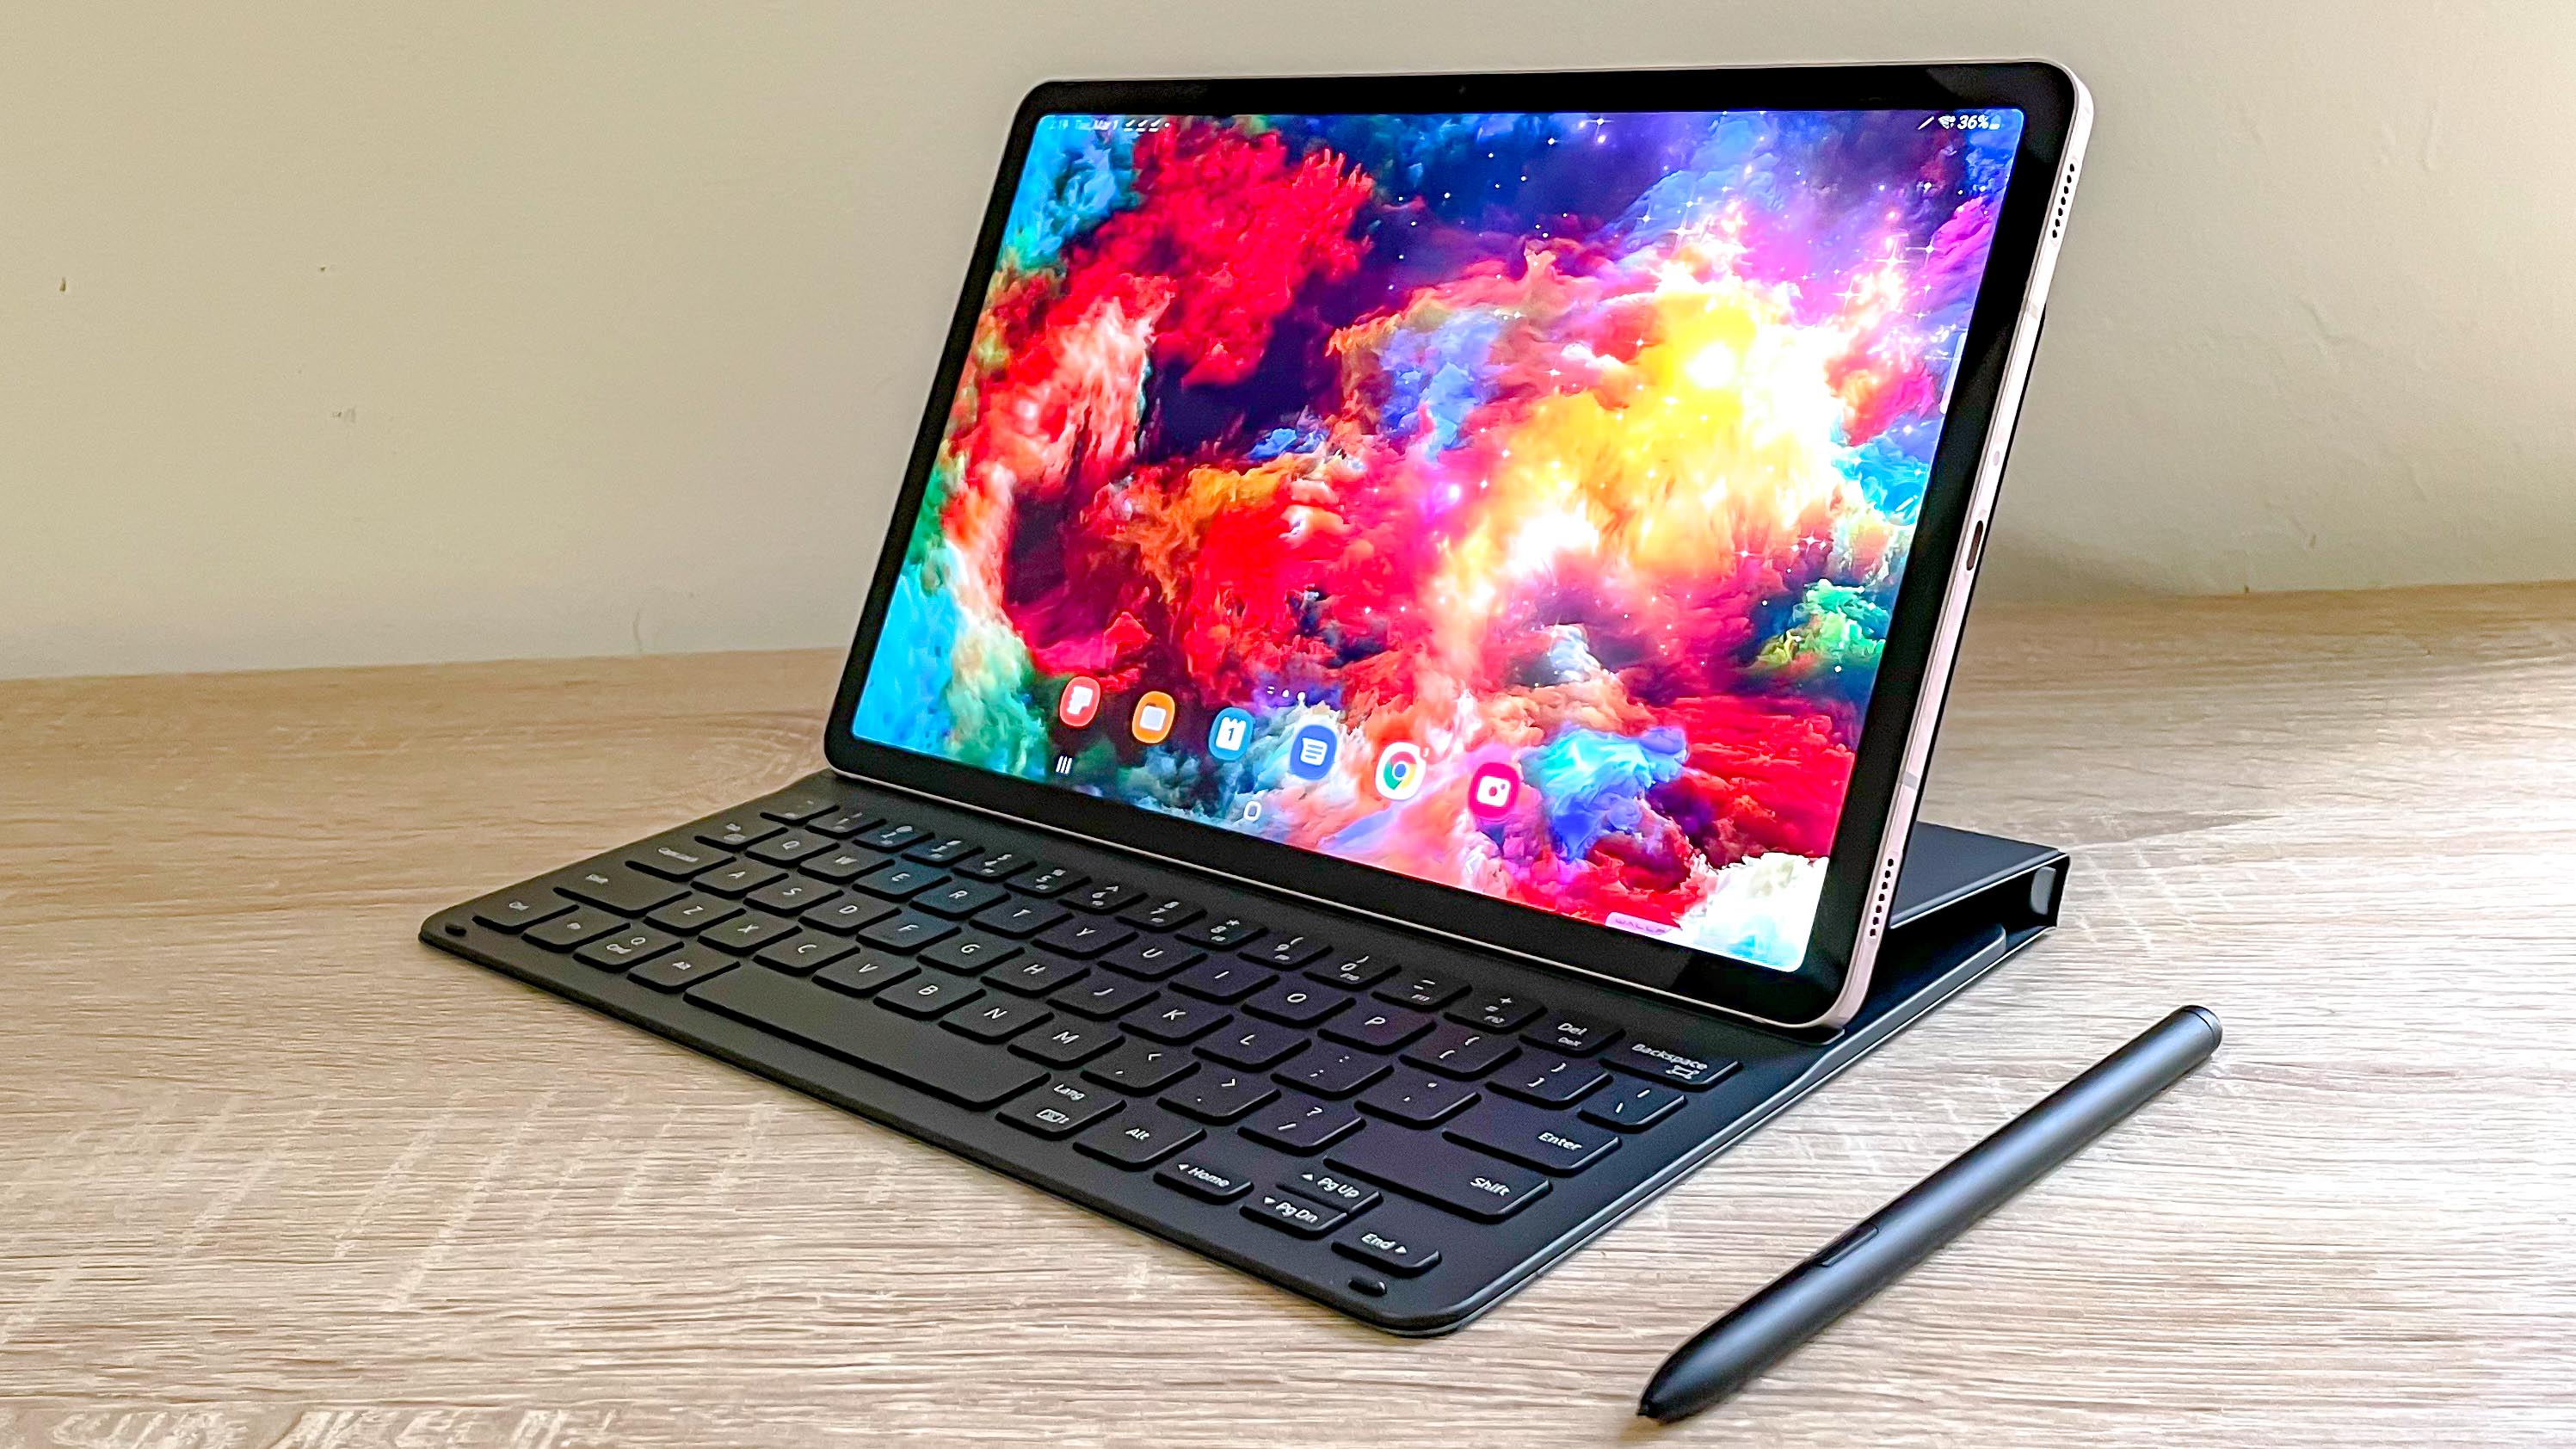 Samsung Galaxy Tab S8 open in keyboard cover on desk, facing left